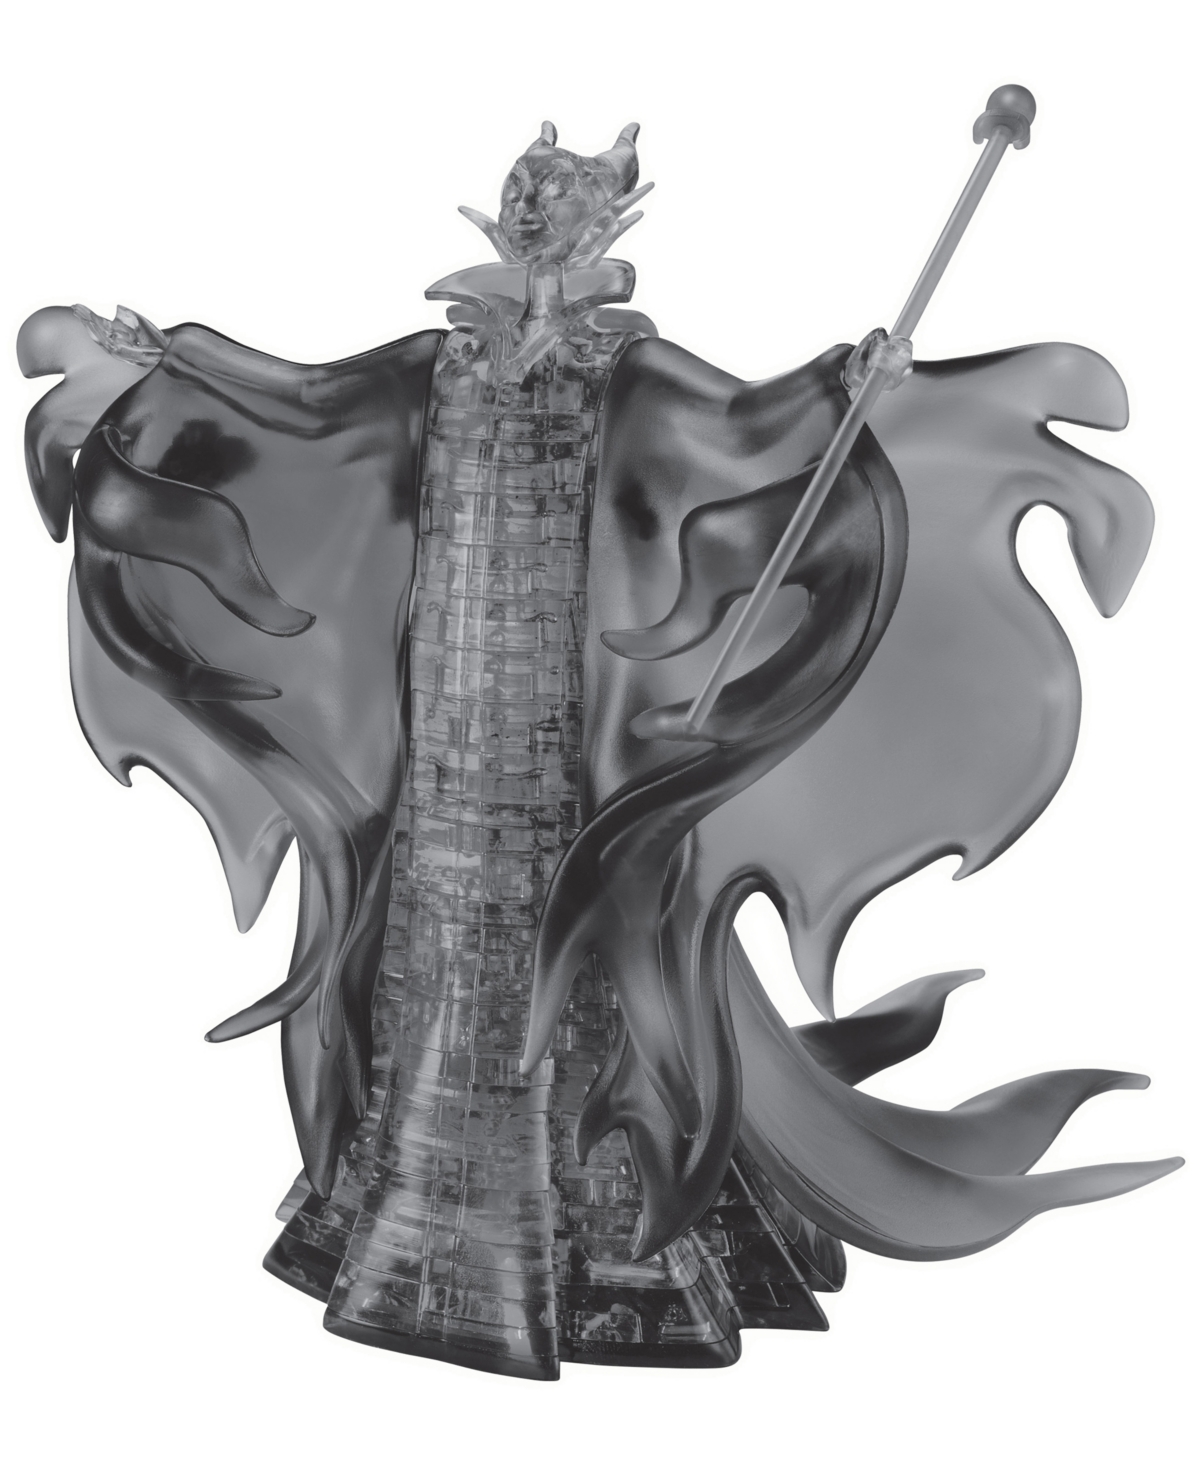 University Games Kids' Bepuzzled 3d Crystal Puzzle Disney Maleficent, 74 Pieces In No Color